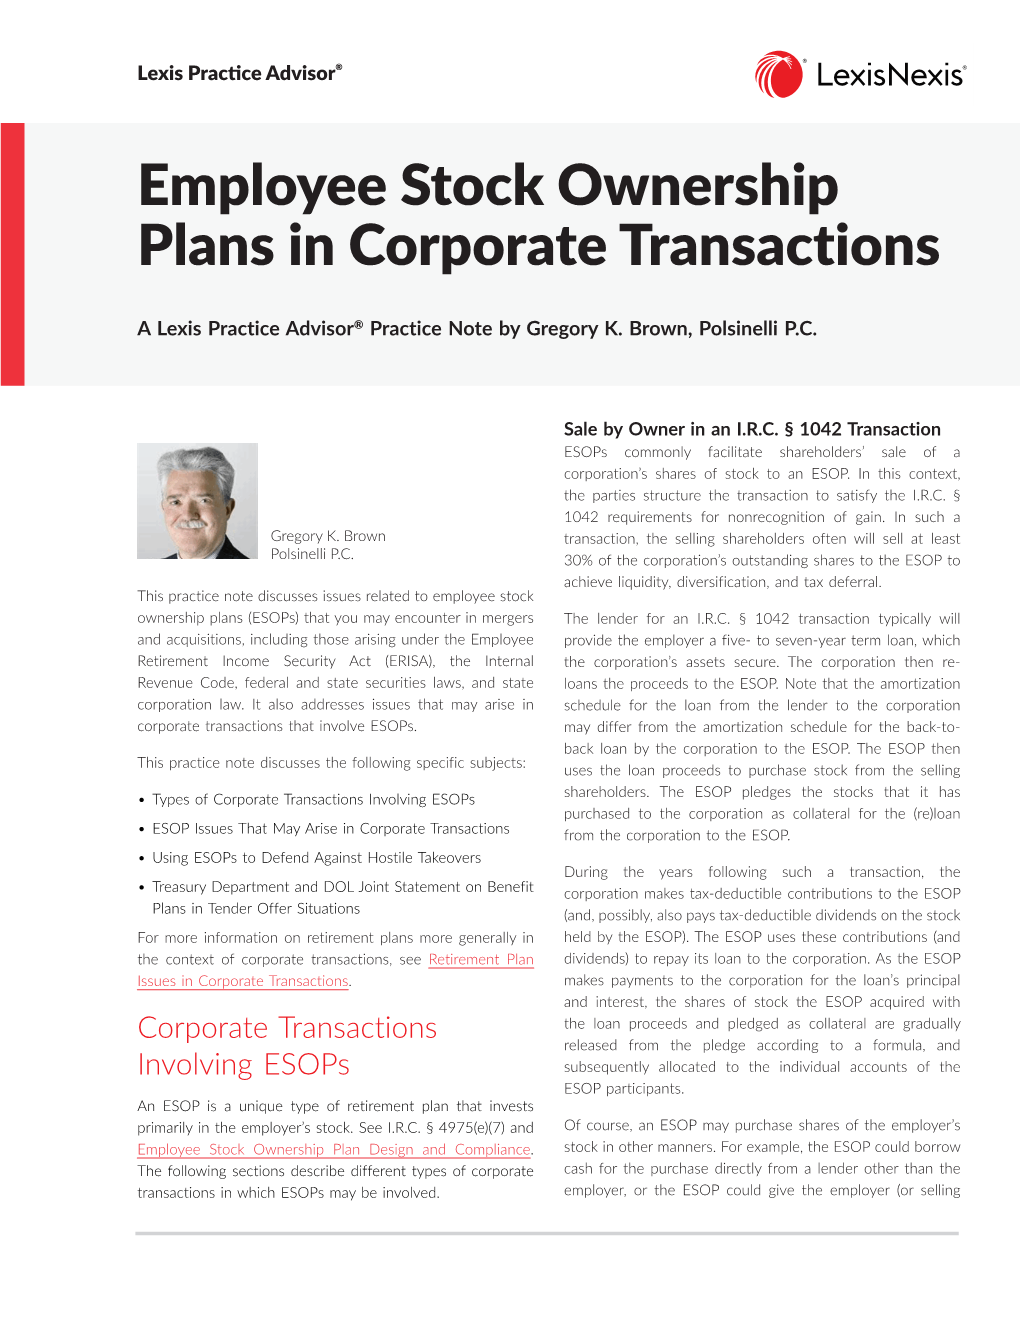 Employee Stock Ownership Plans in Corporate Transactions